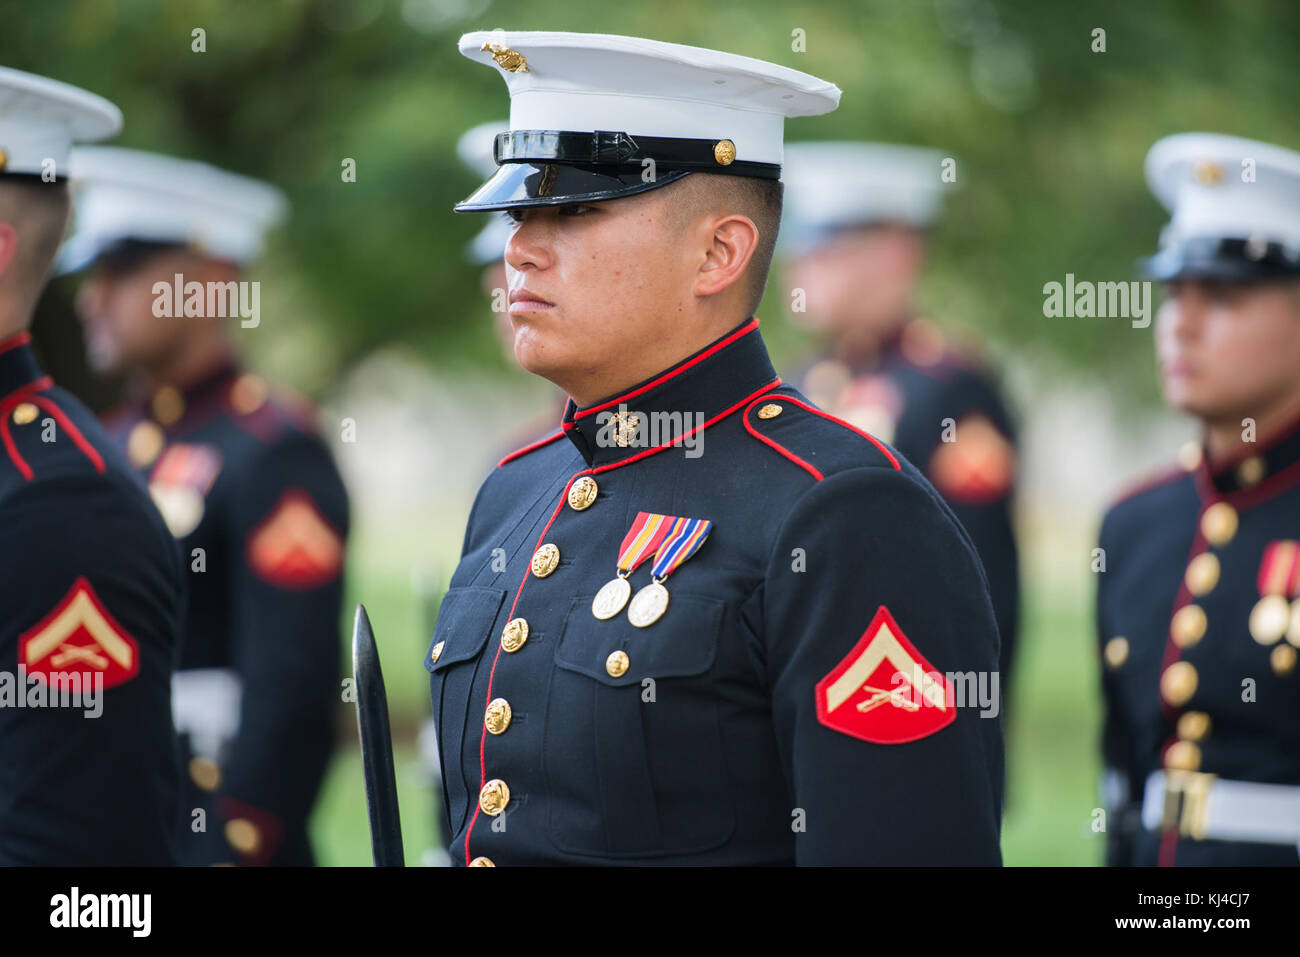 Full Honors Repatriation of U.S. Marine Corps 2nd Lt. George S. Bussa at Arlington National Cemetery (37576821546) Stock Photo